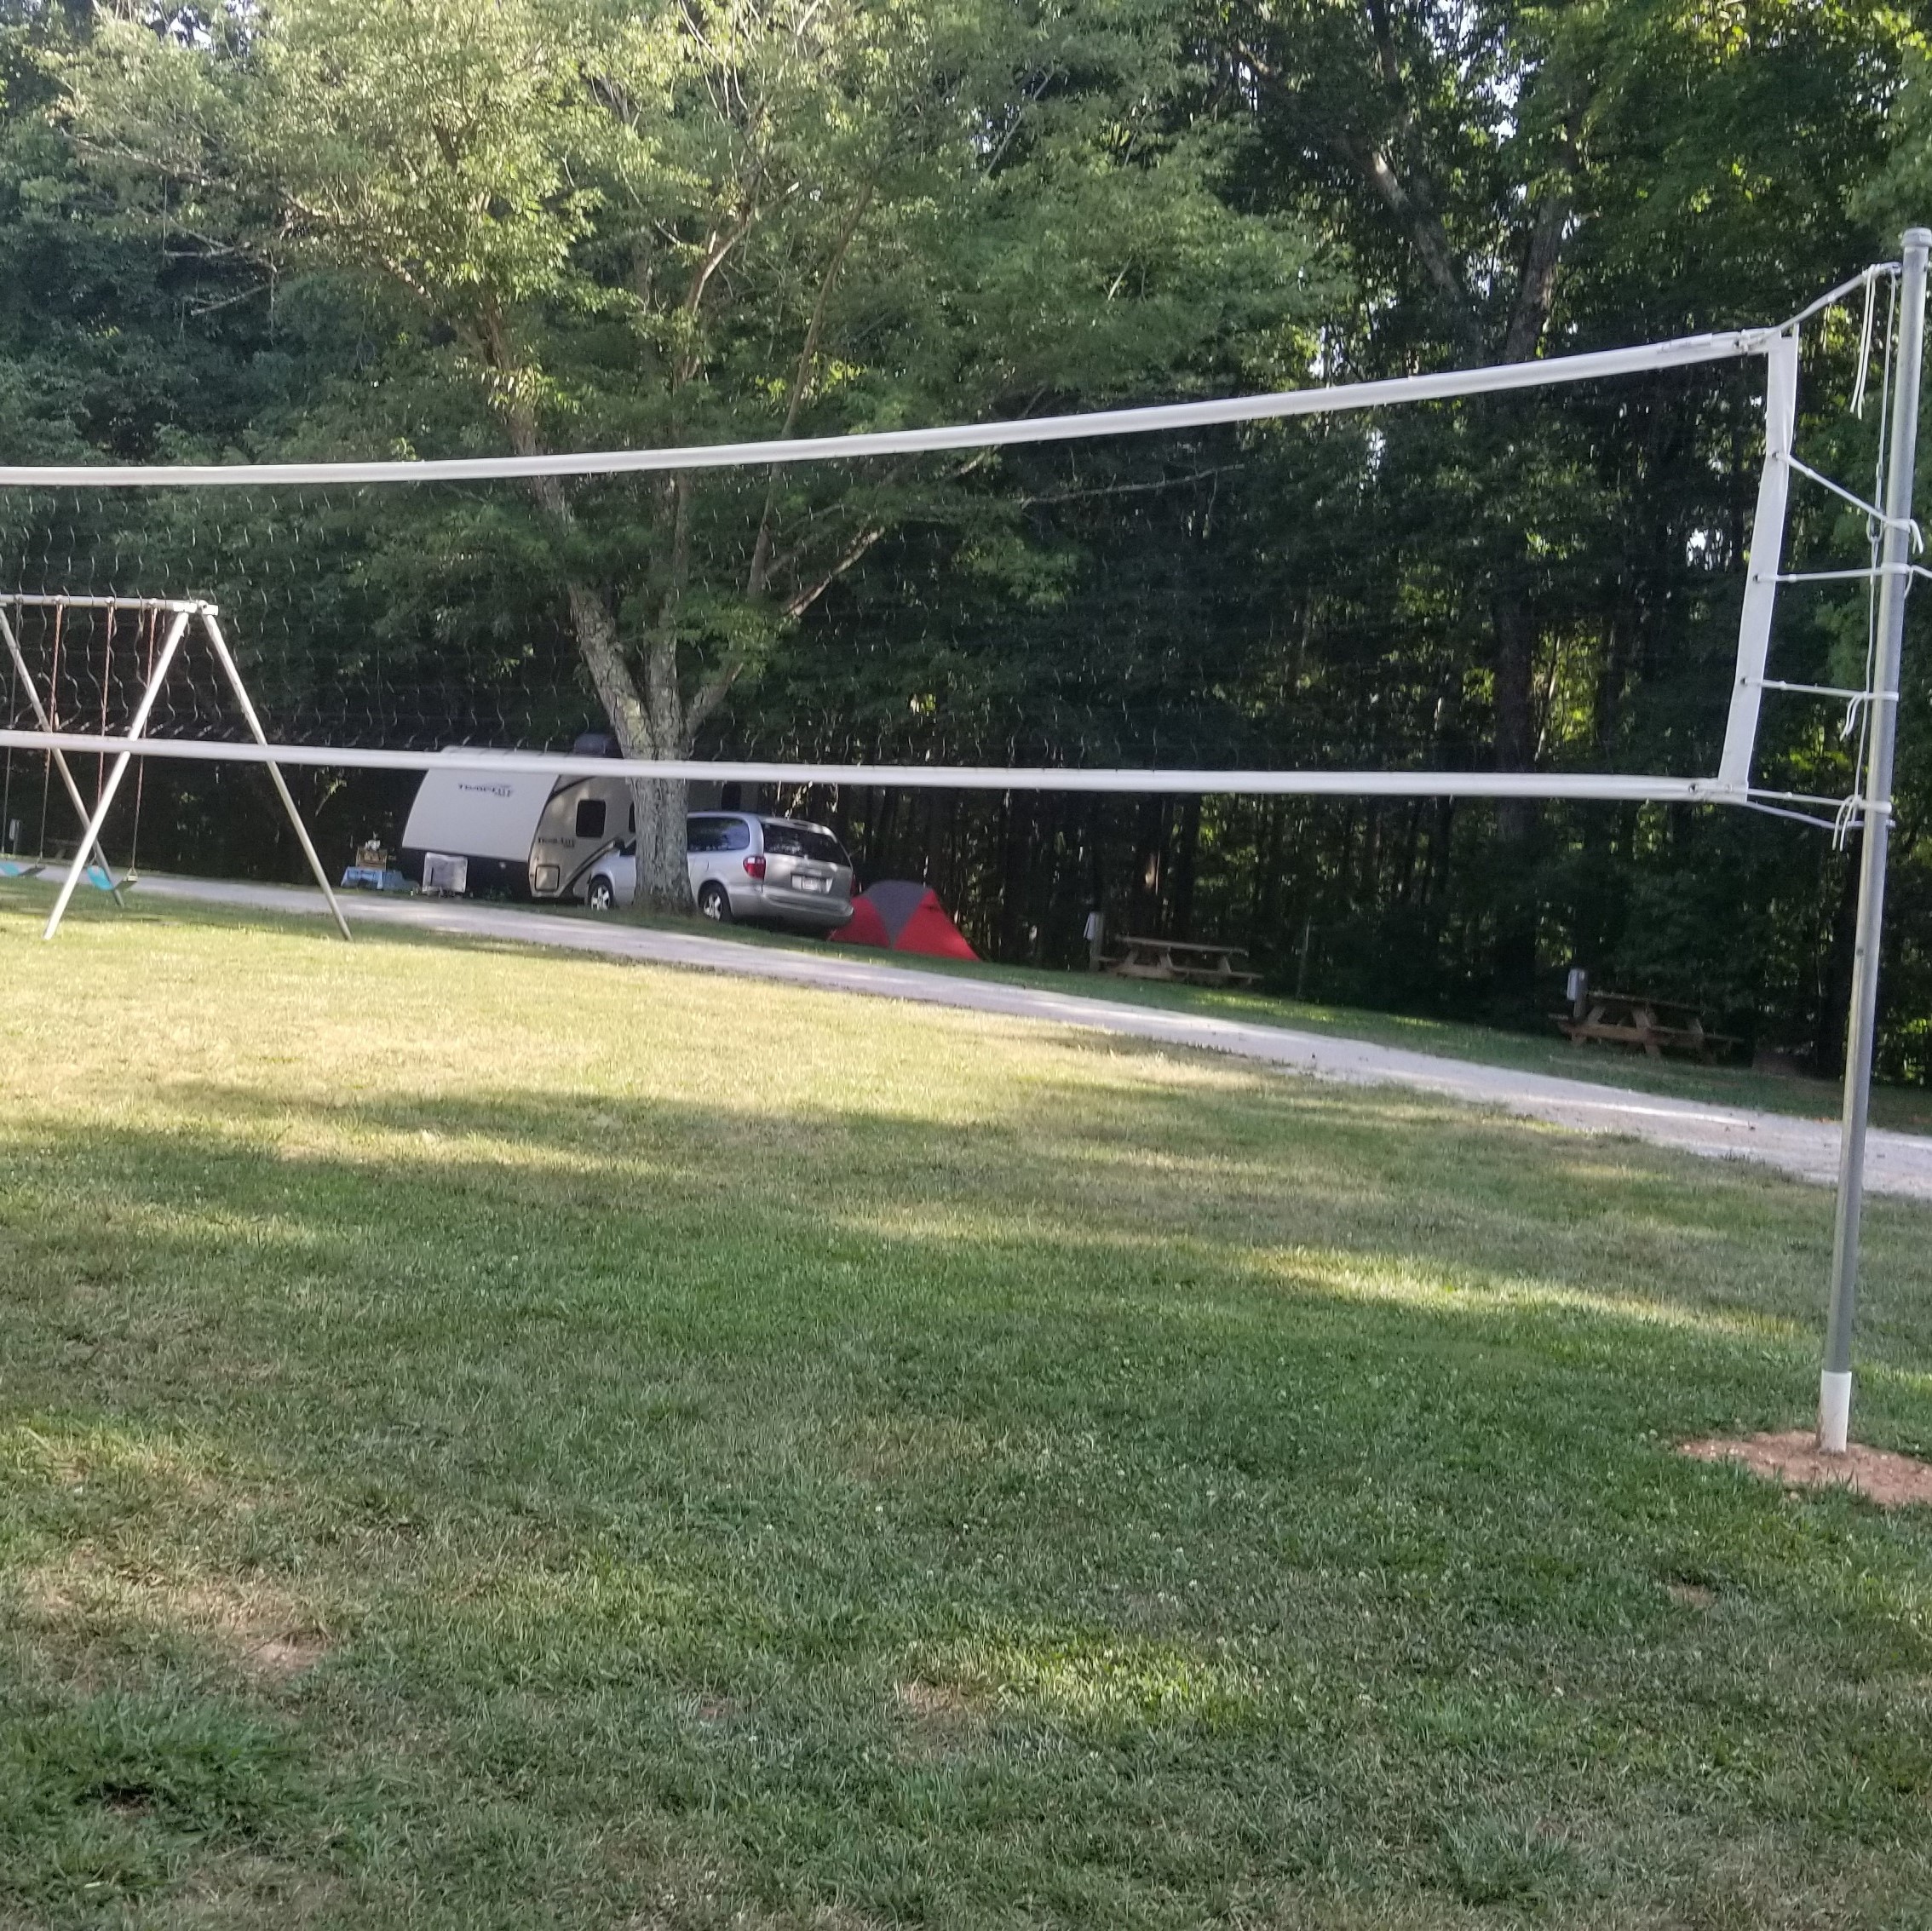 Volley and swing